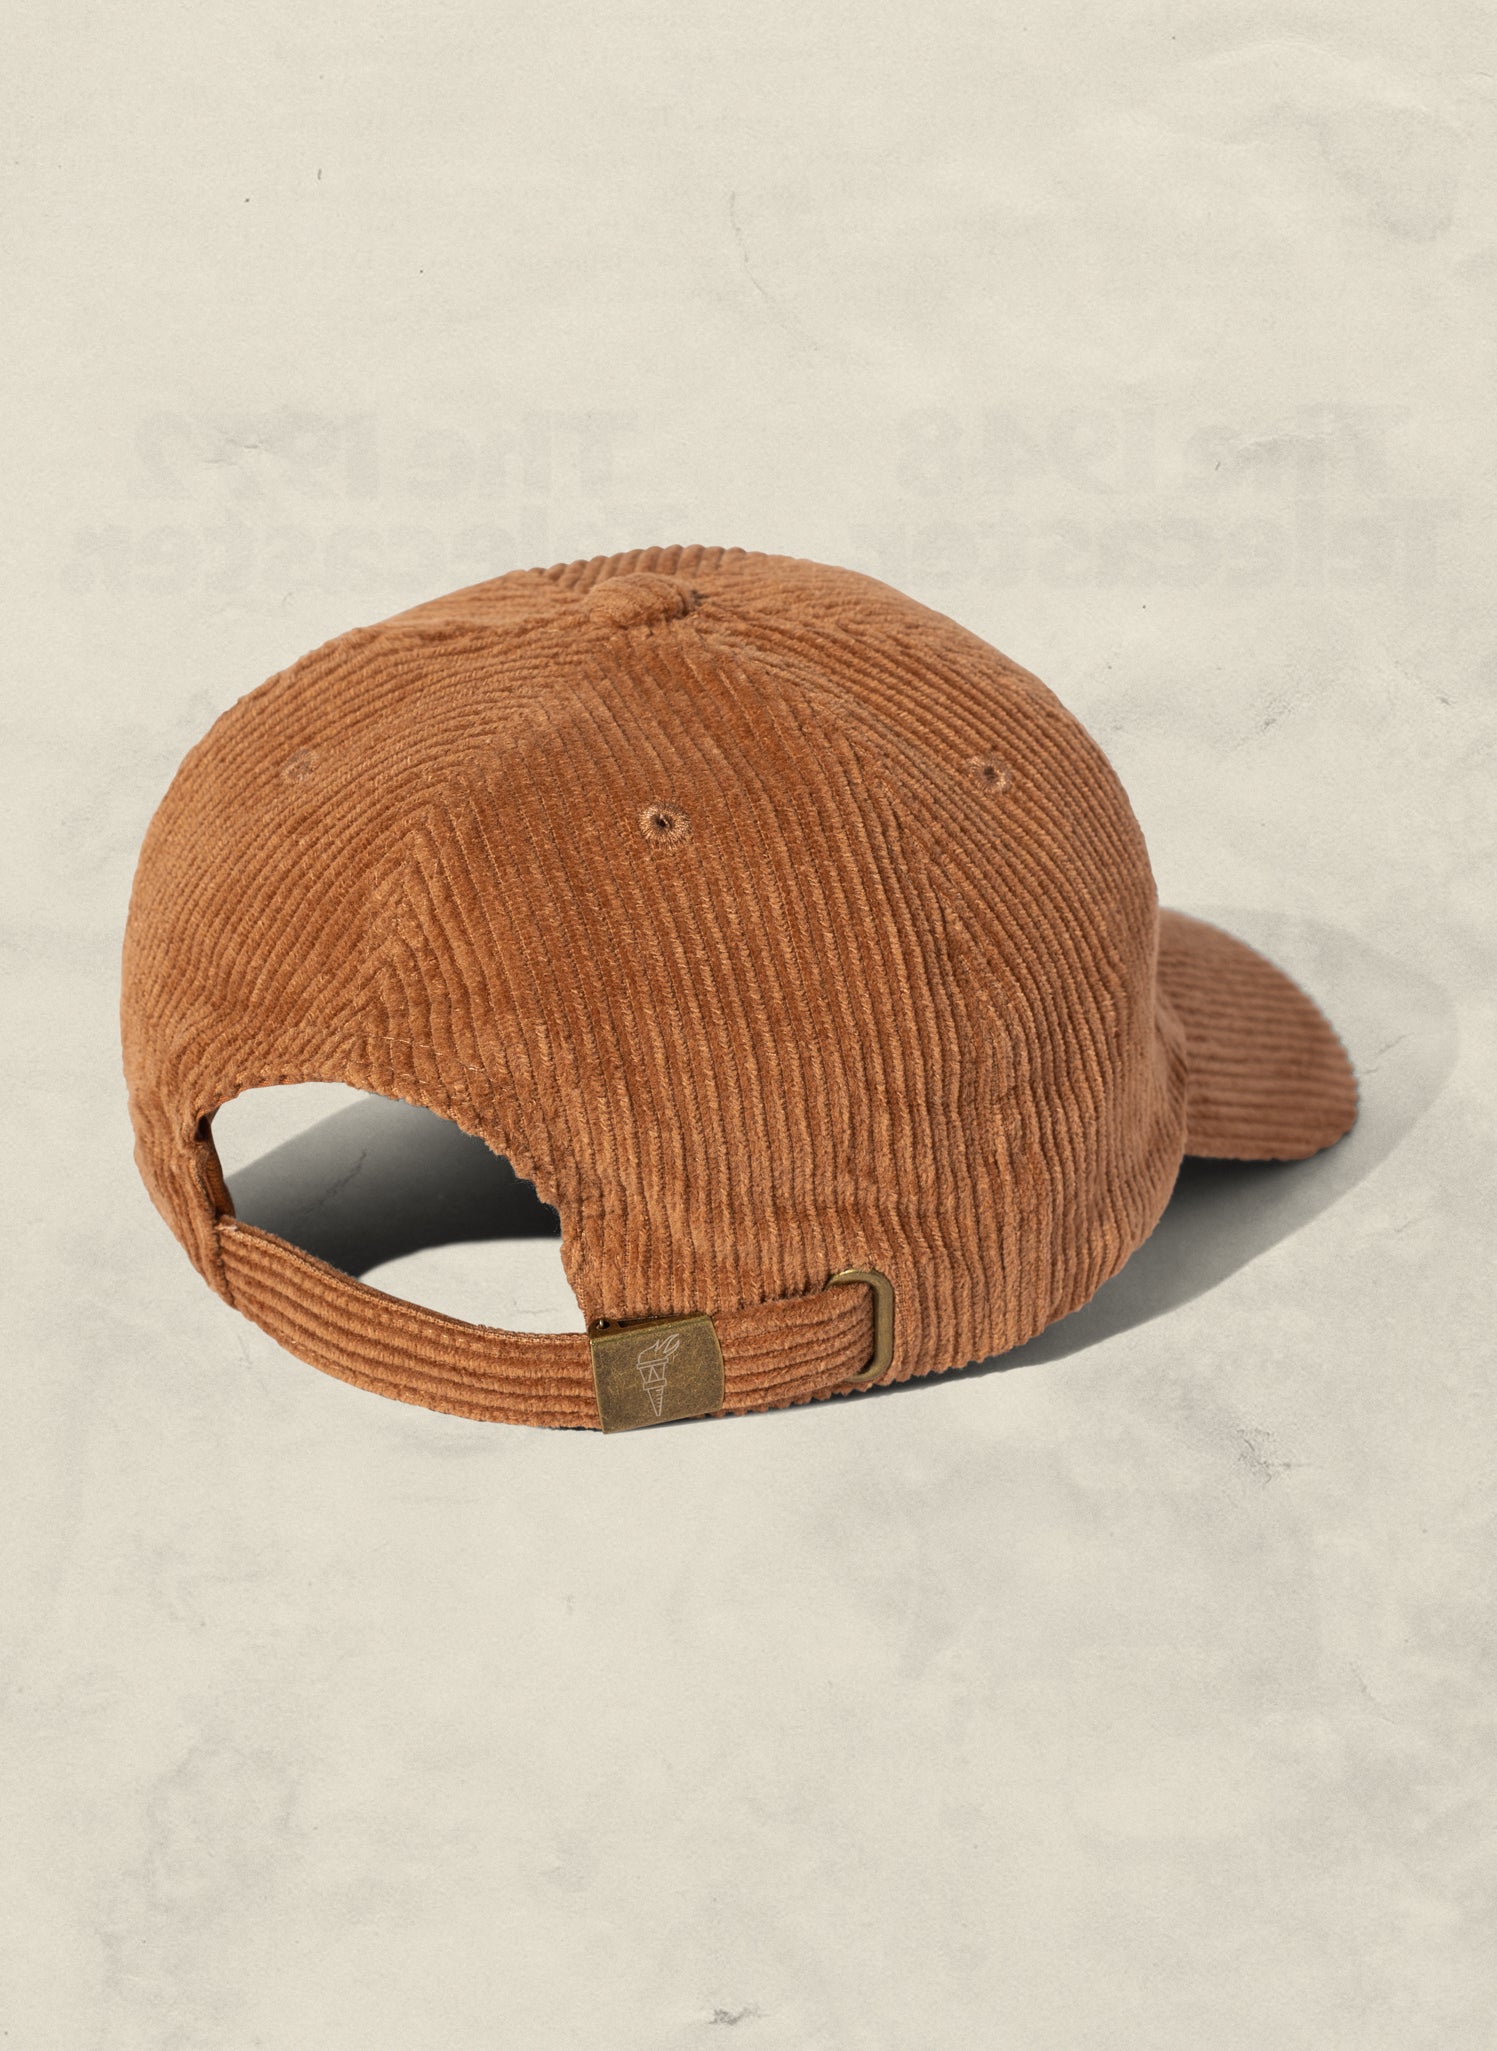 Soft Unstructured Corduroy Dad Hat in Vintage Unique Earthy Colors by Weld Mfg